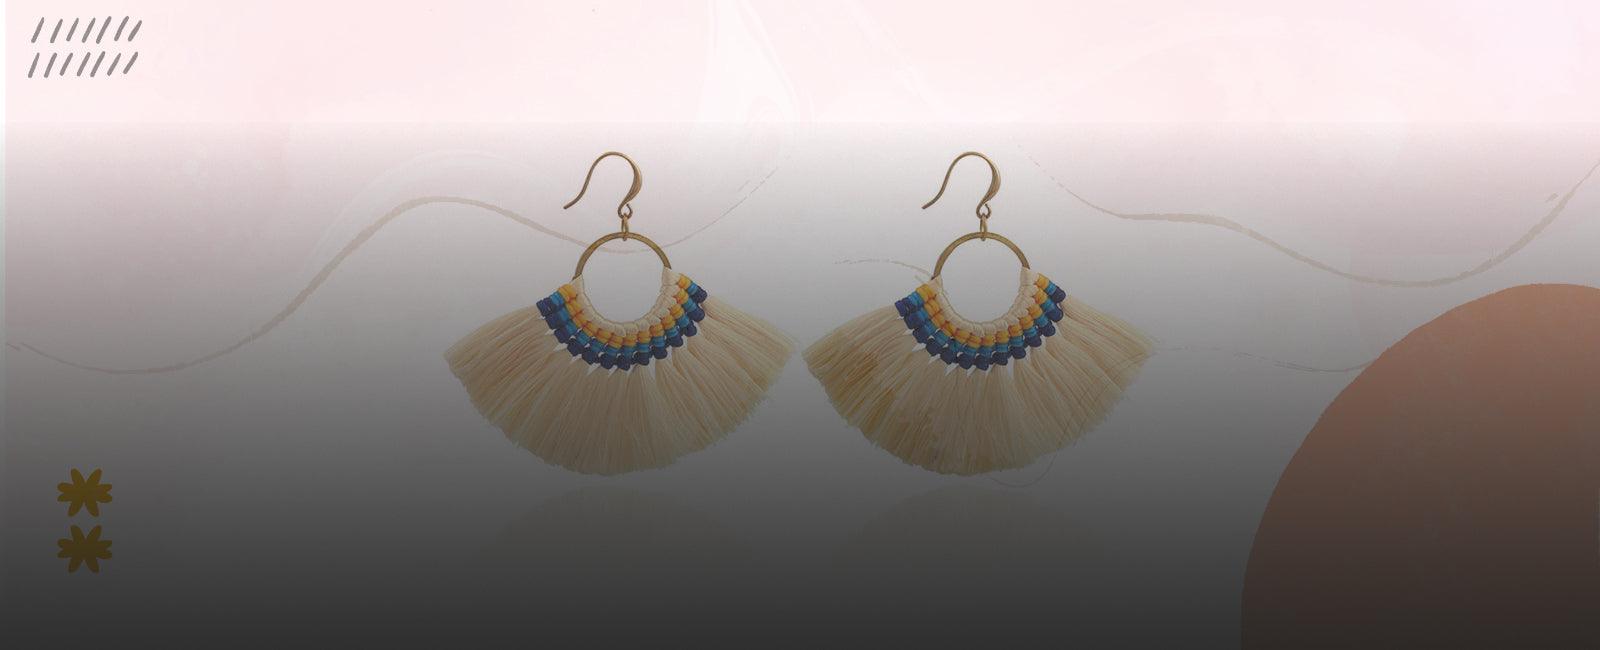 Earring Making Workshop with Macrame- 28 August, Saturday - Fabriclore